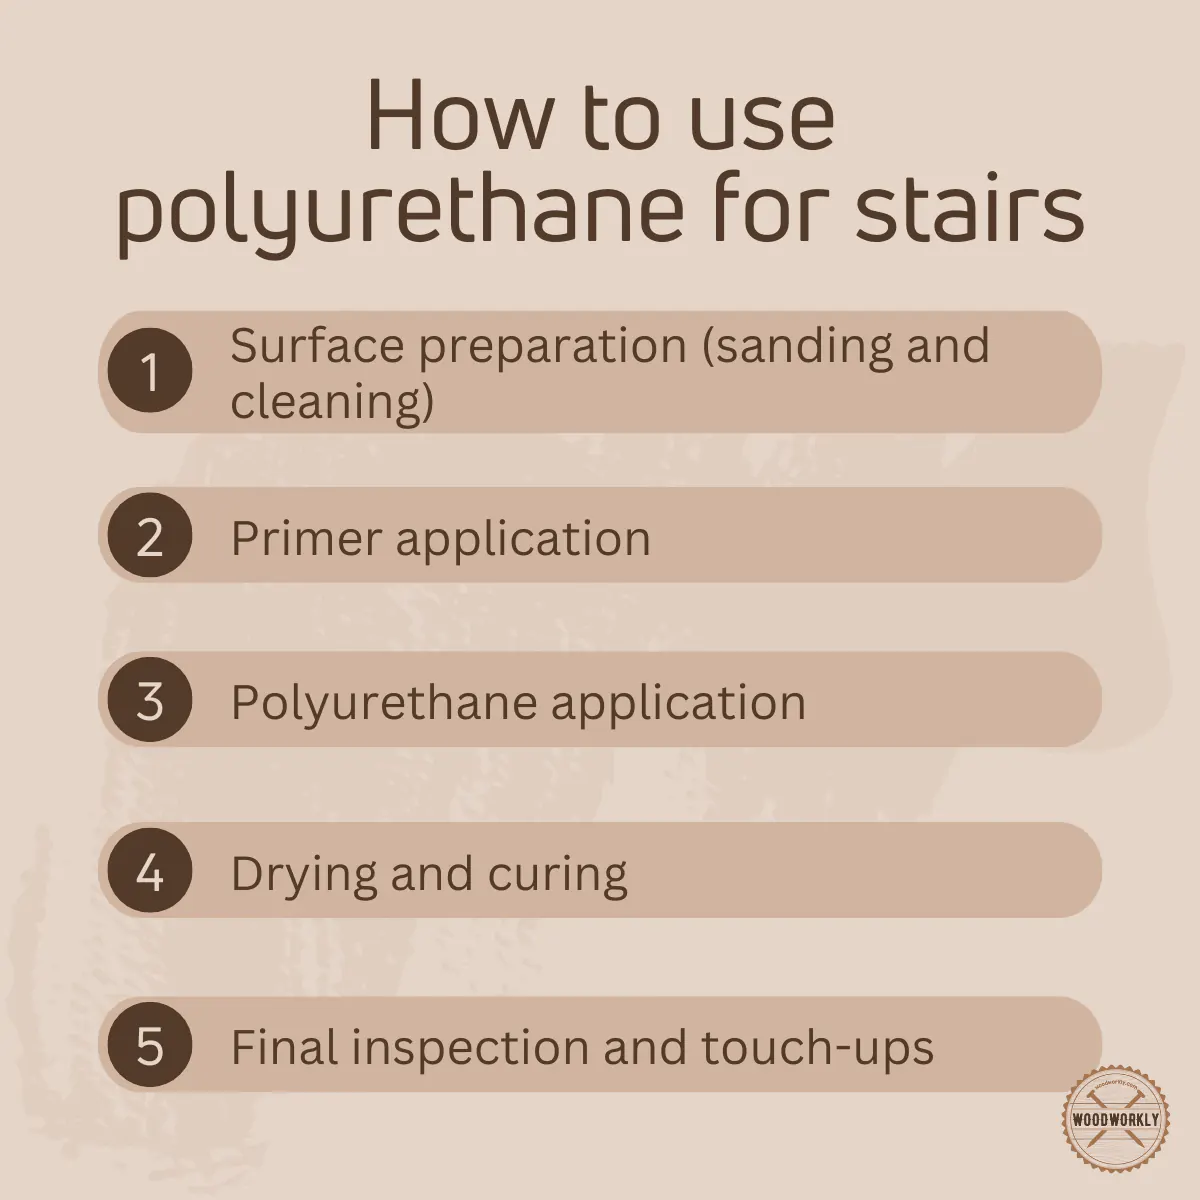 How to use polyurethane for stairs